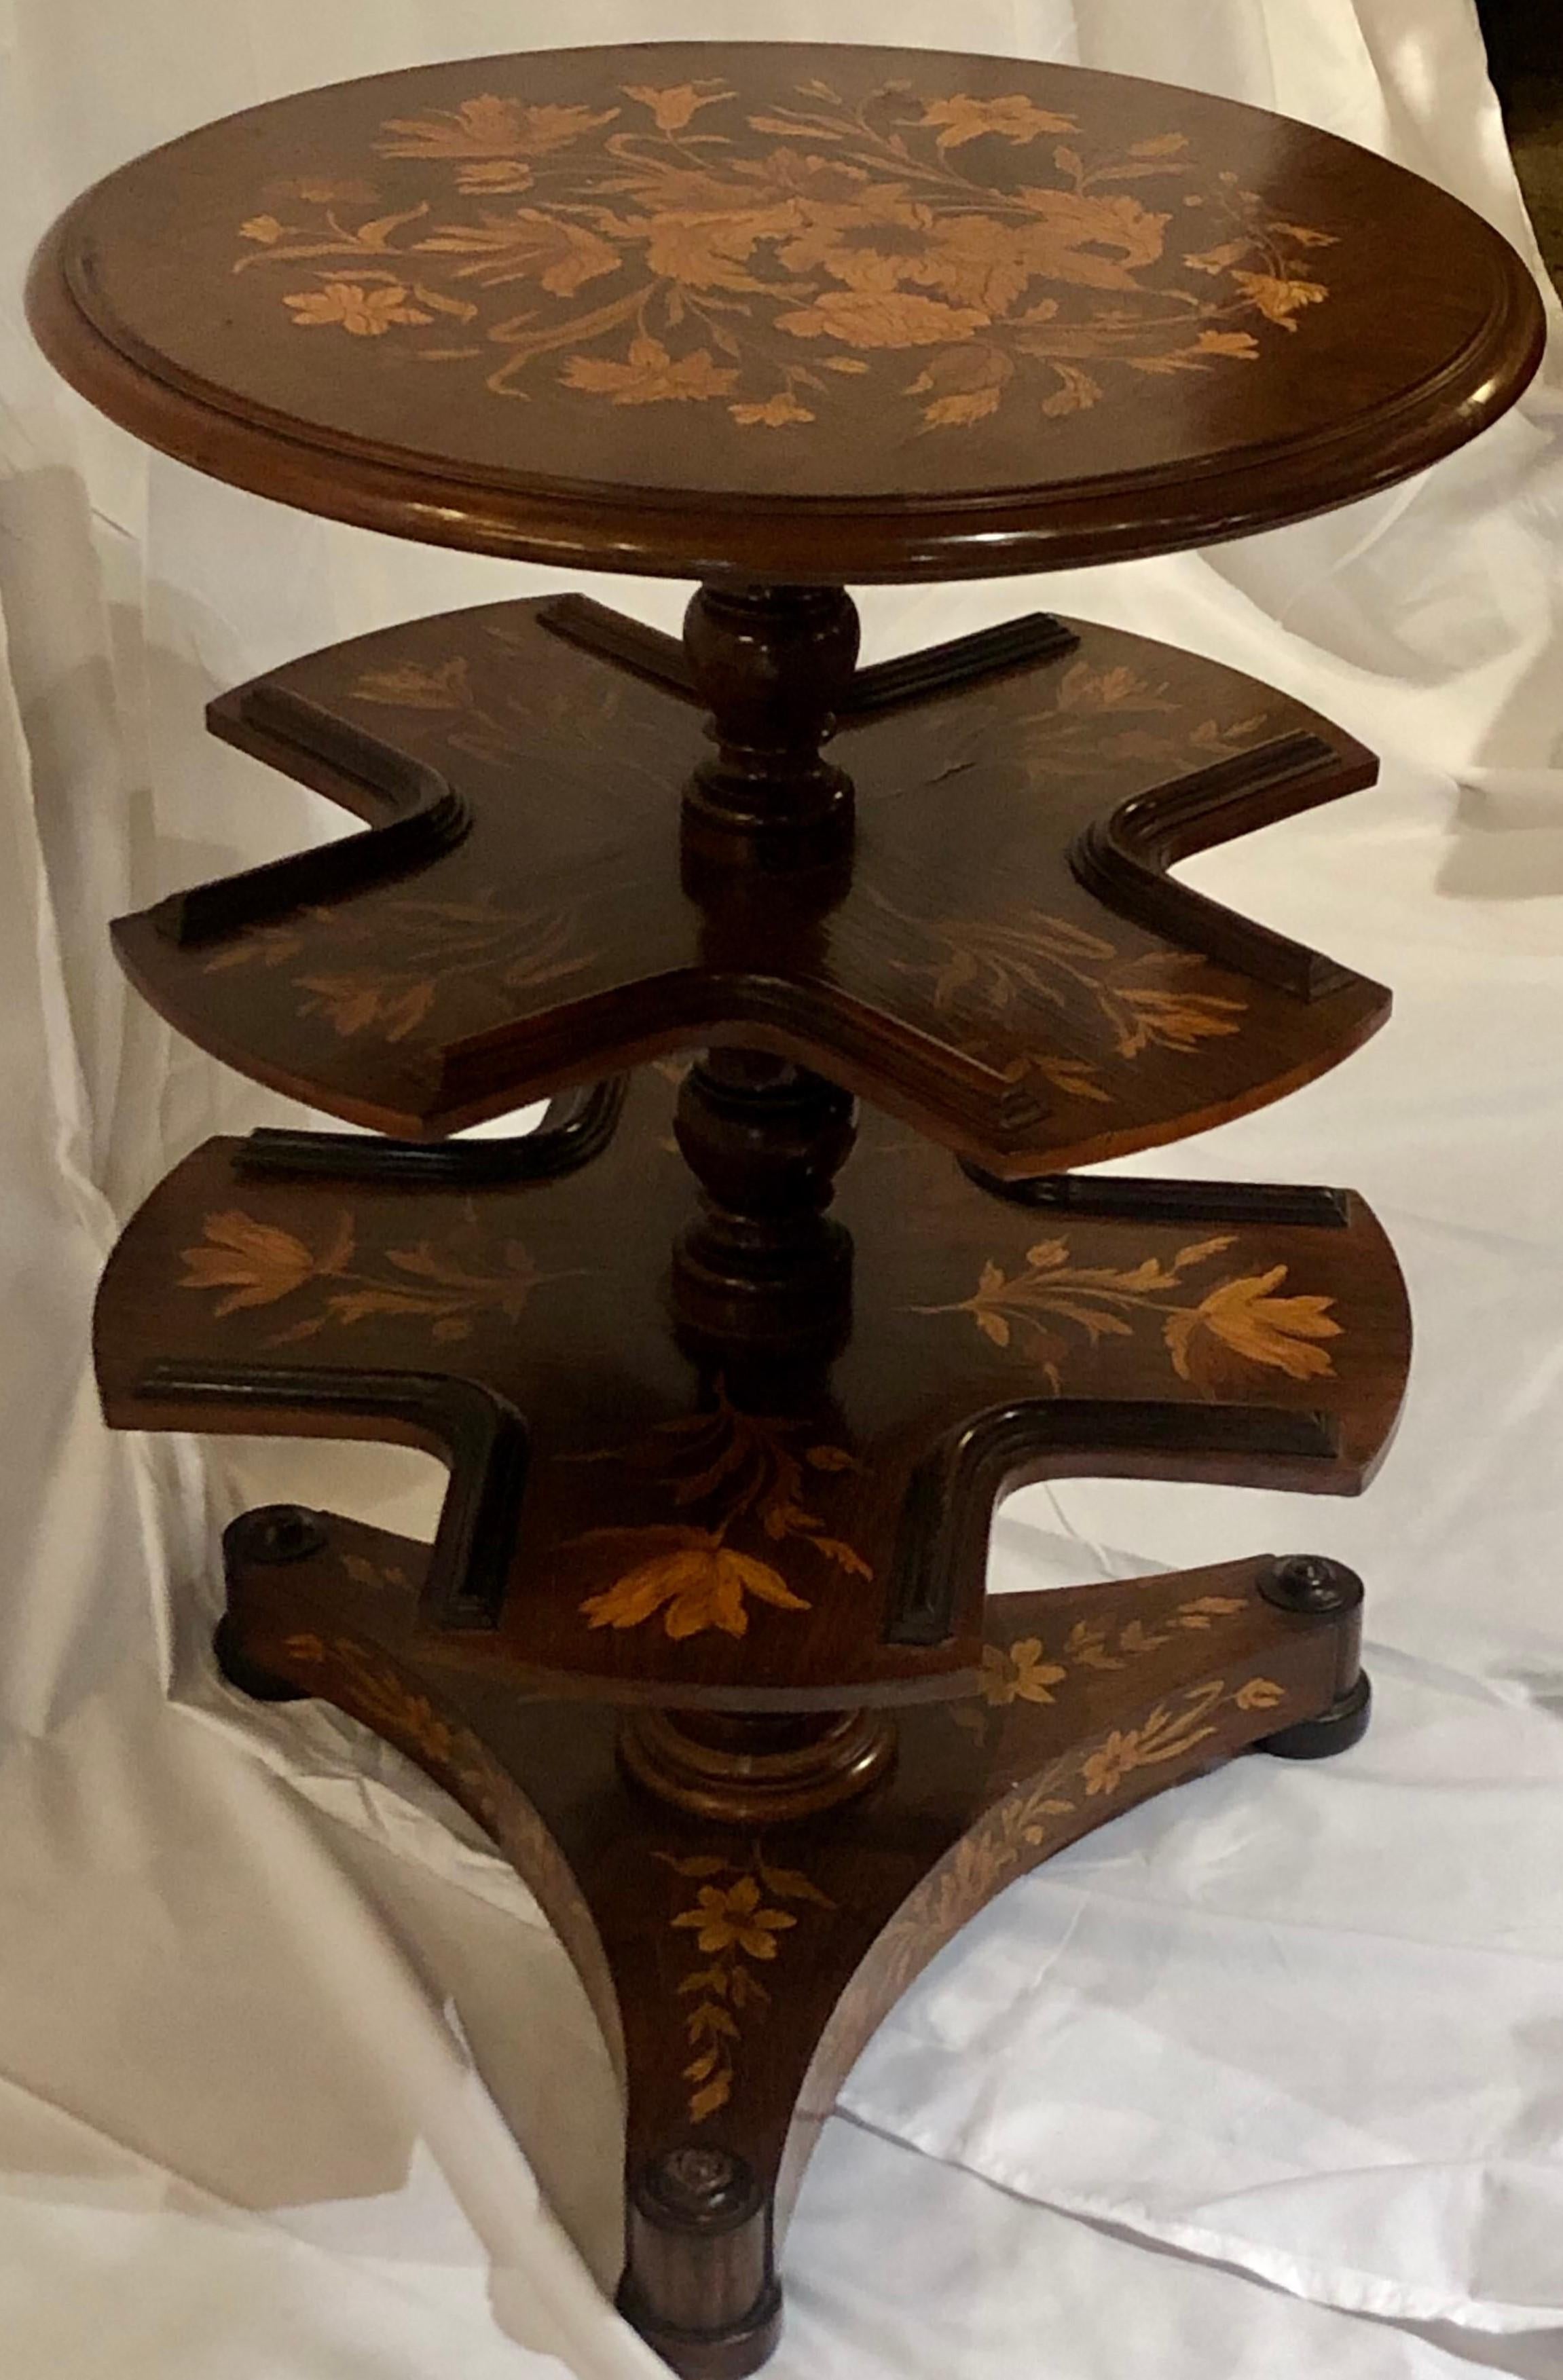 Antique 19th Century Dutch Marquetry 3 Tier Book Stand Table In Good Condition For Sale In New Orleans, LA